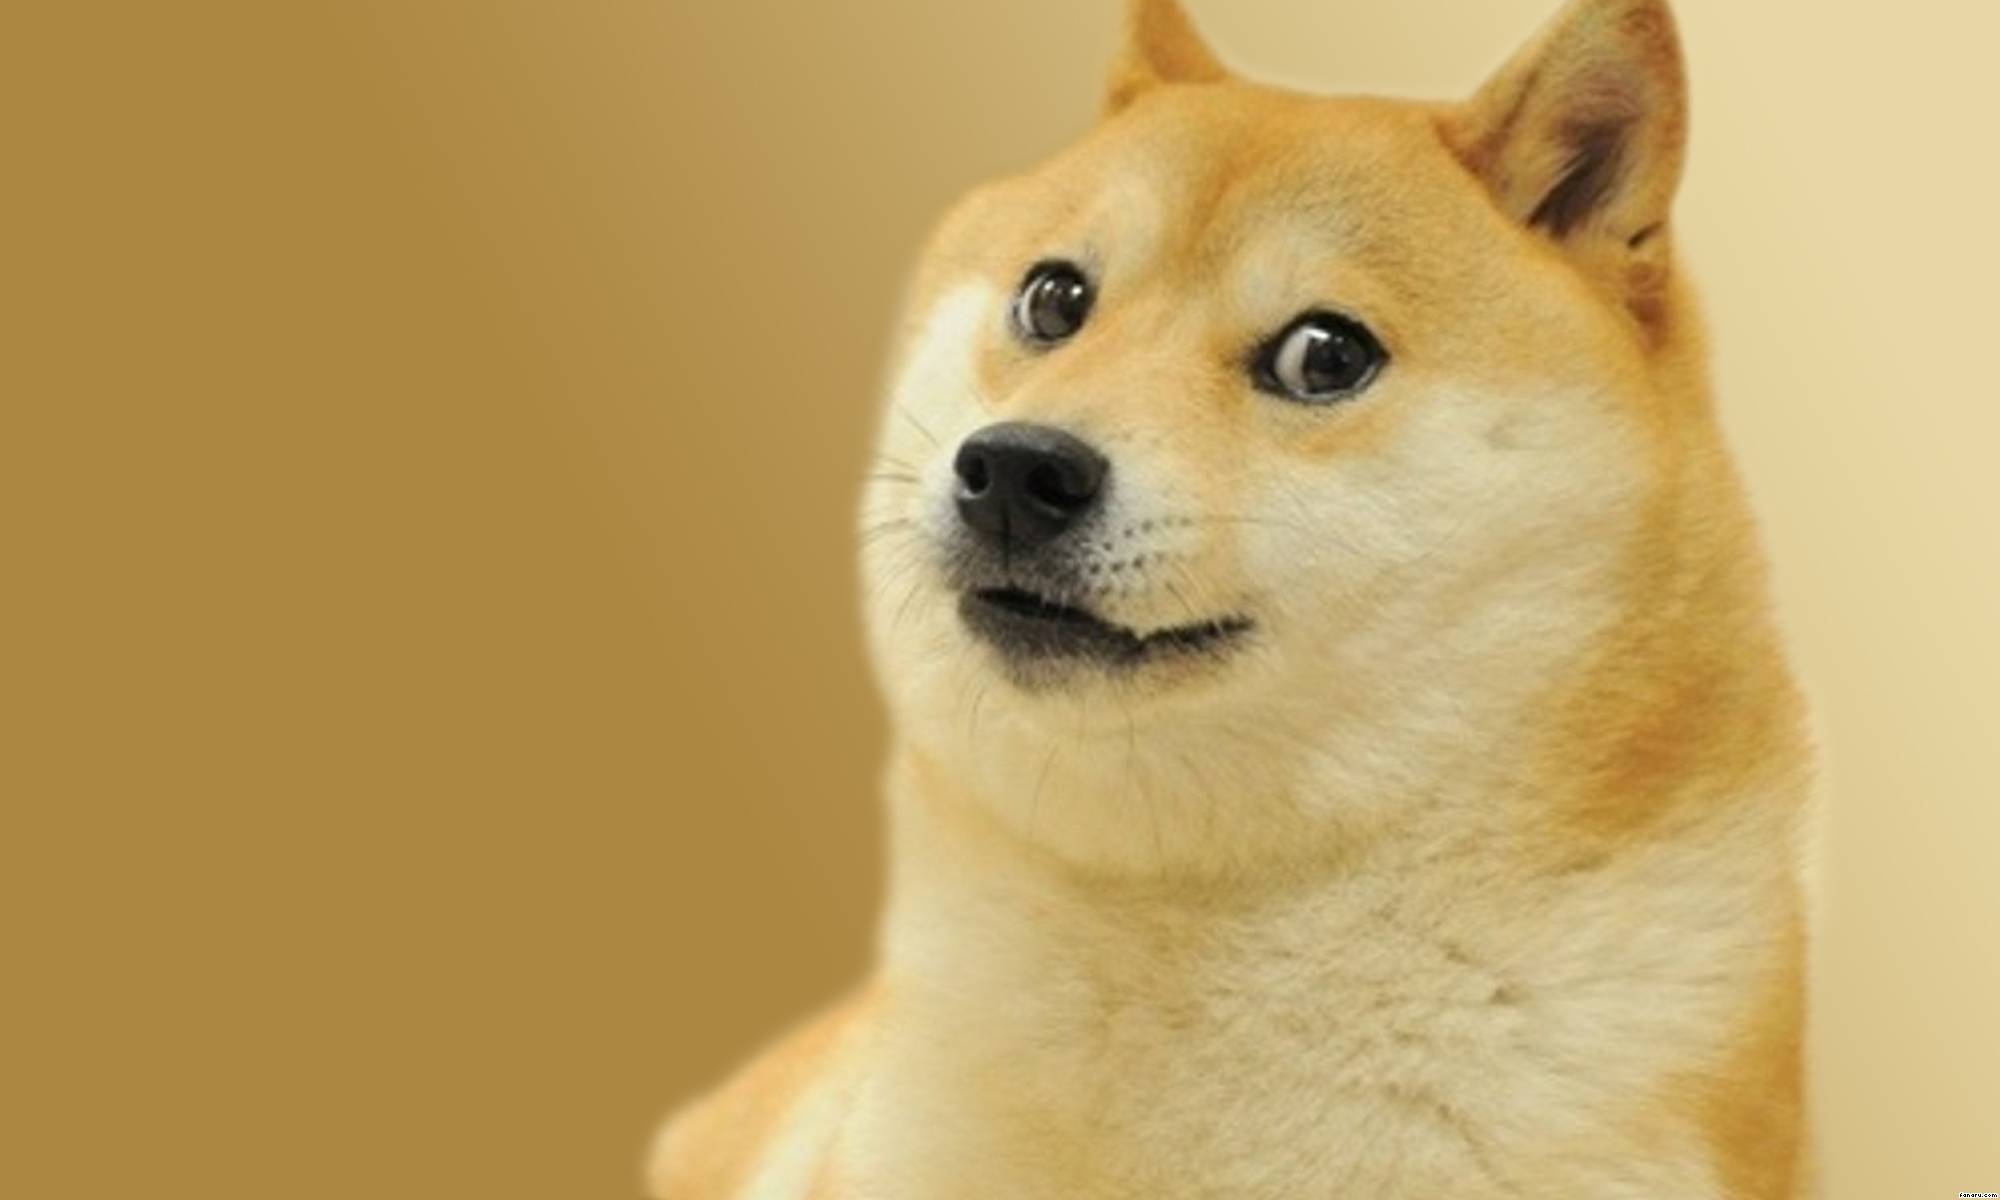 Doge does not want to see you now.